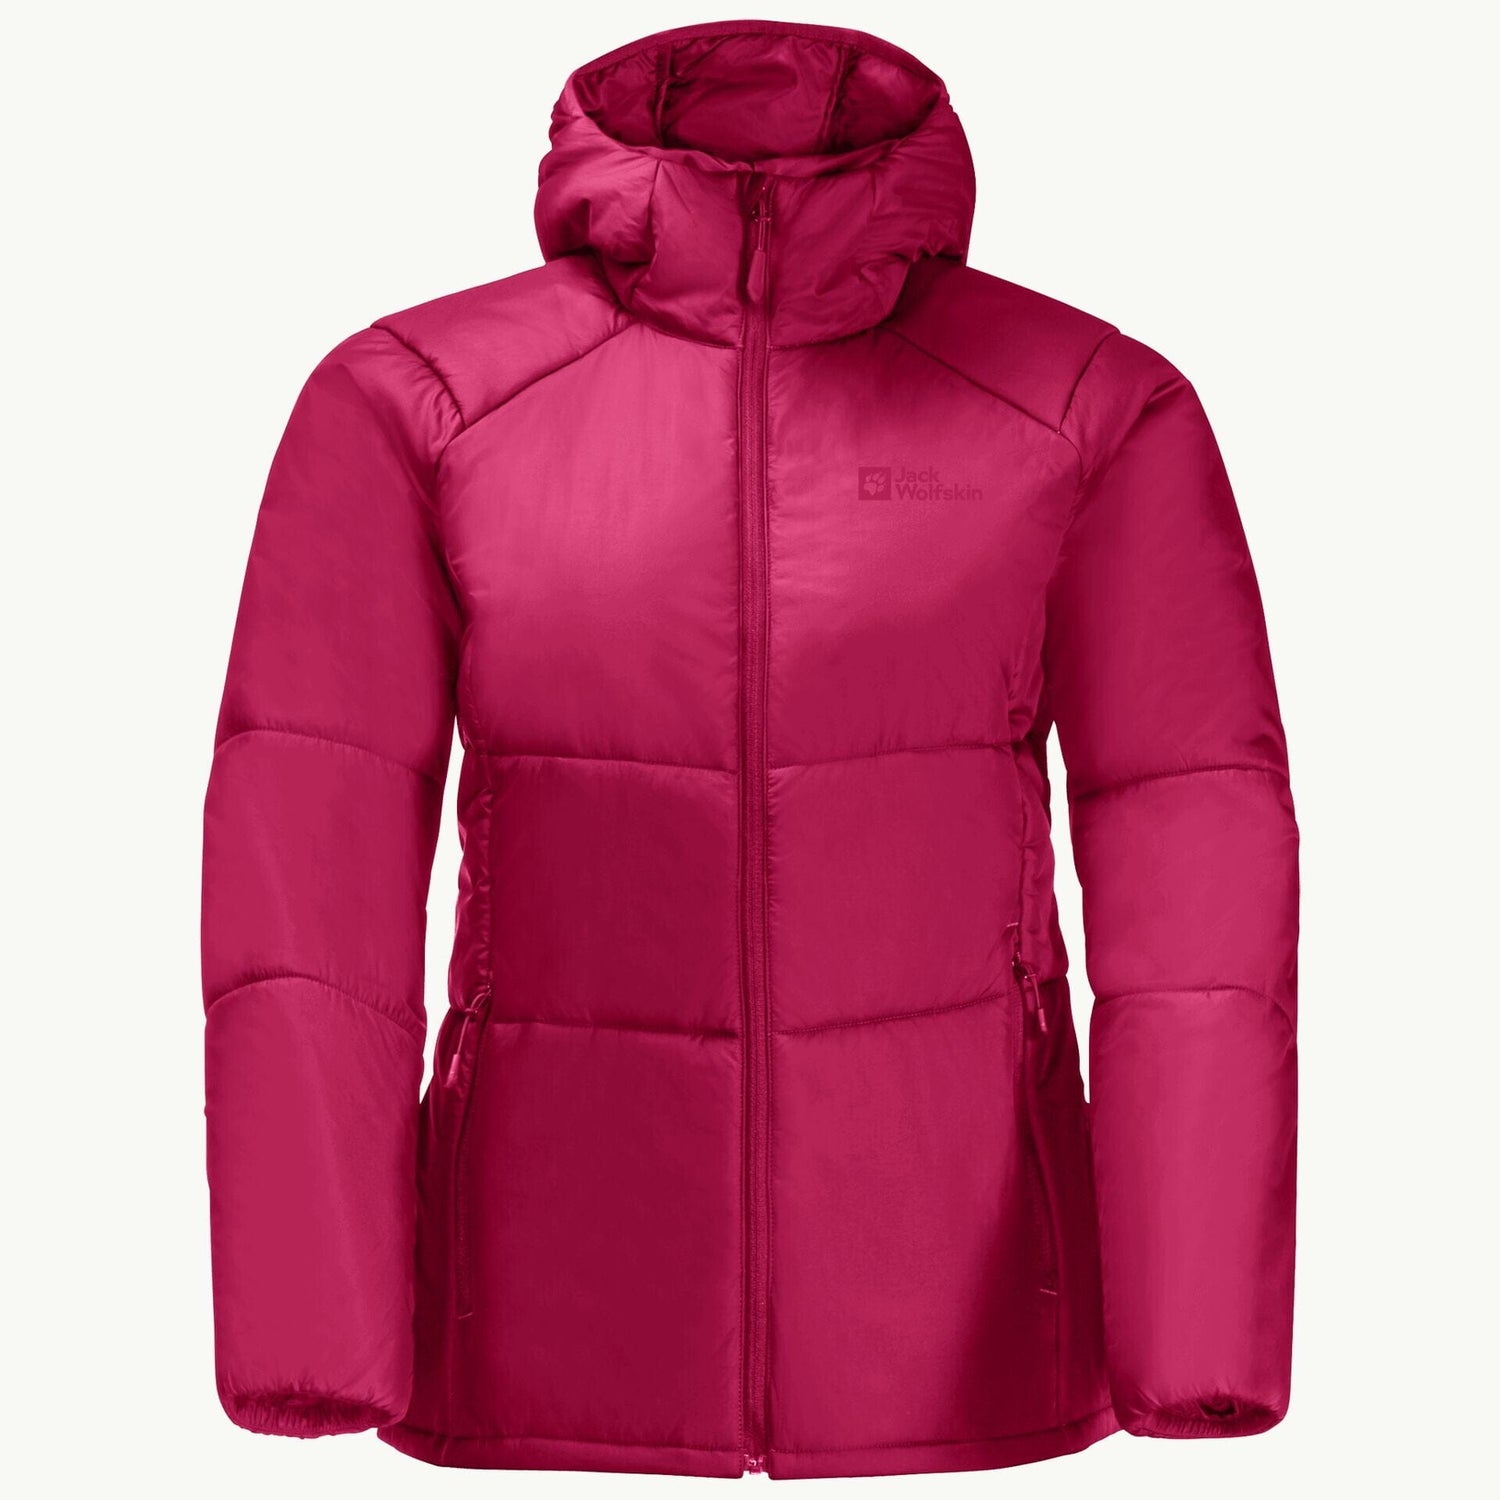 Jack Wolfskin W\'s Recycled Bergland Ins – Weekendbee jacket insulated sportswear - Hoody materials - sustainable